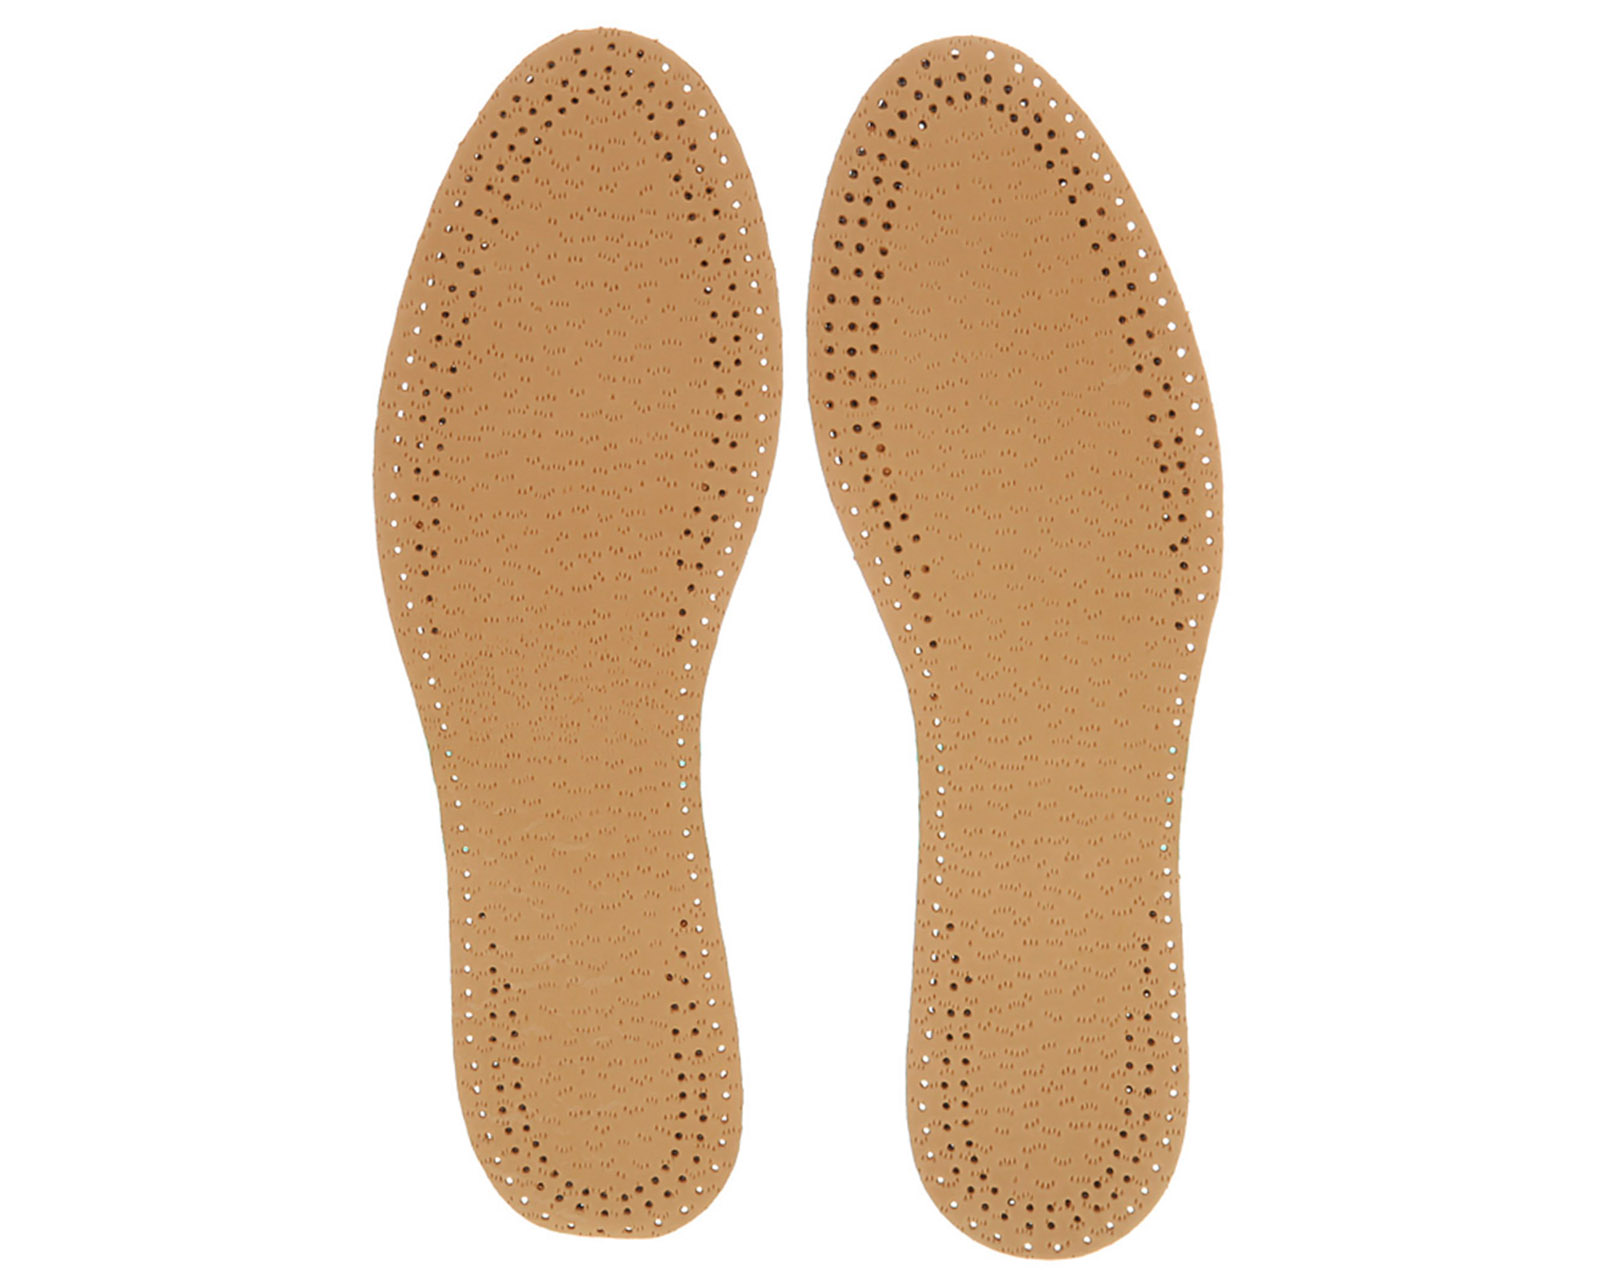 OFFICE Leather Insoles In Brown, 8